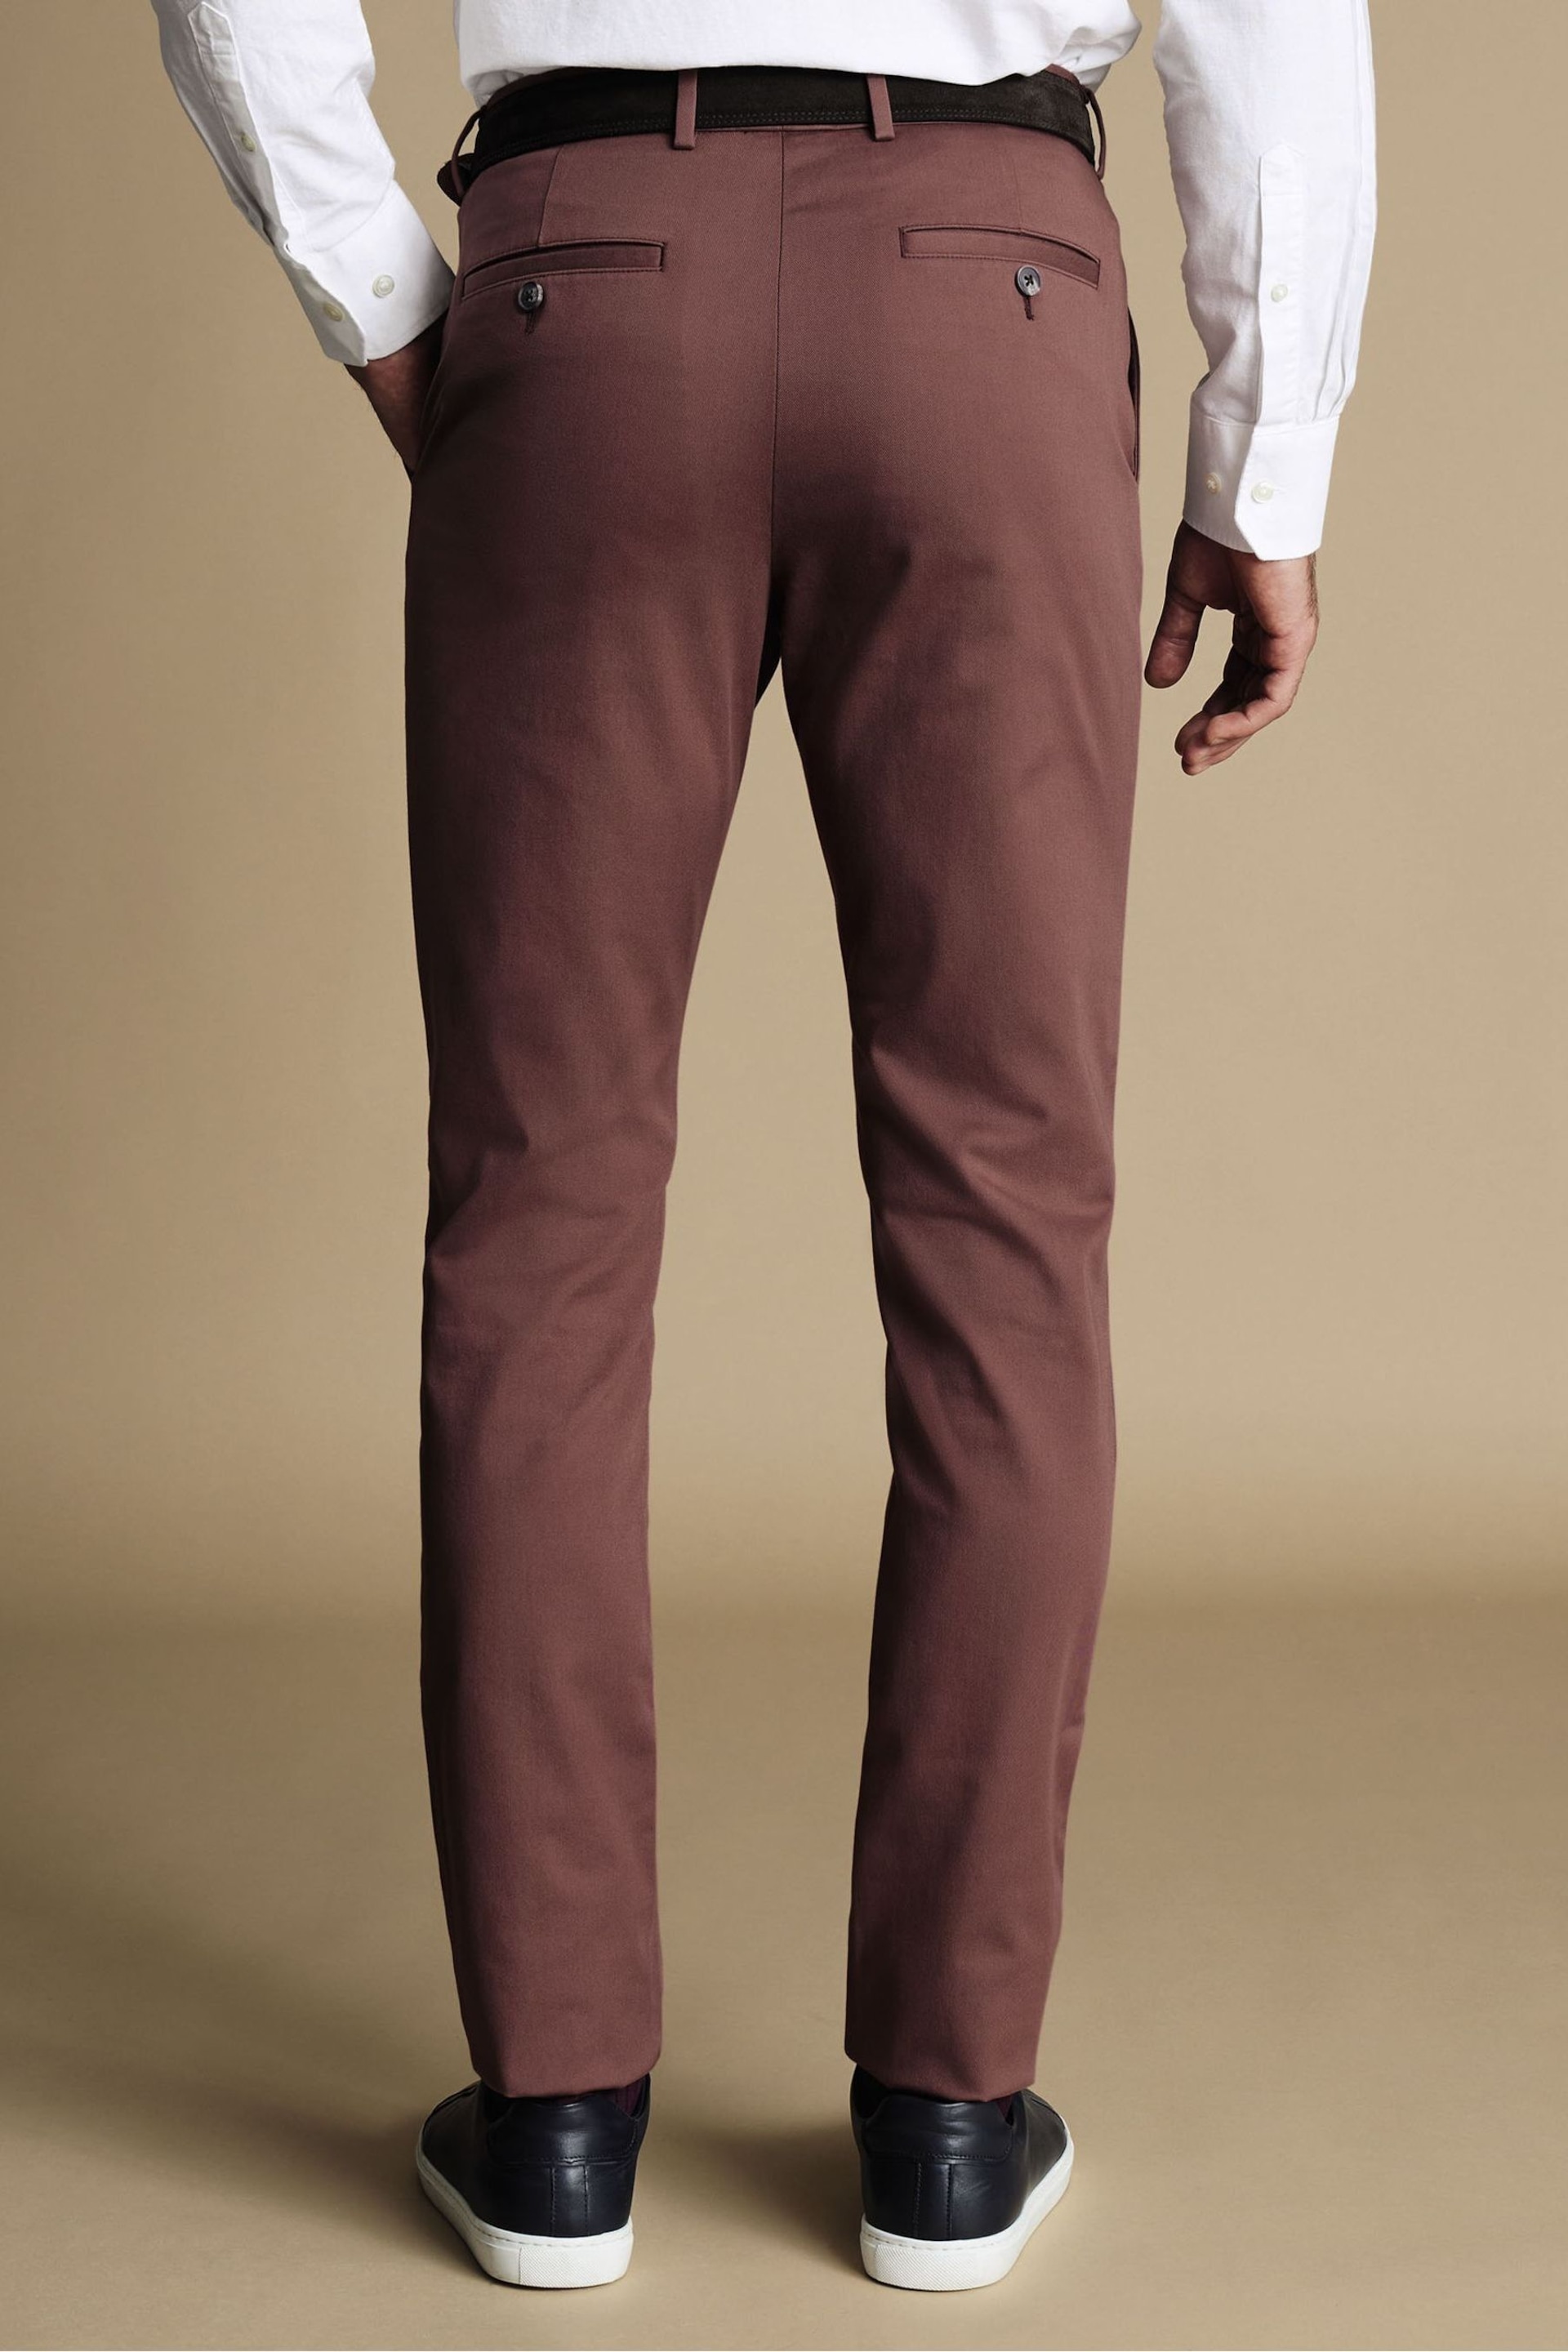 Charles Tyrwhitt Brown Slim Fit Ultimate non-iron Chino Trousers - Image 2 of 3